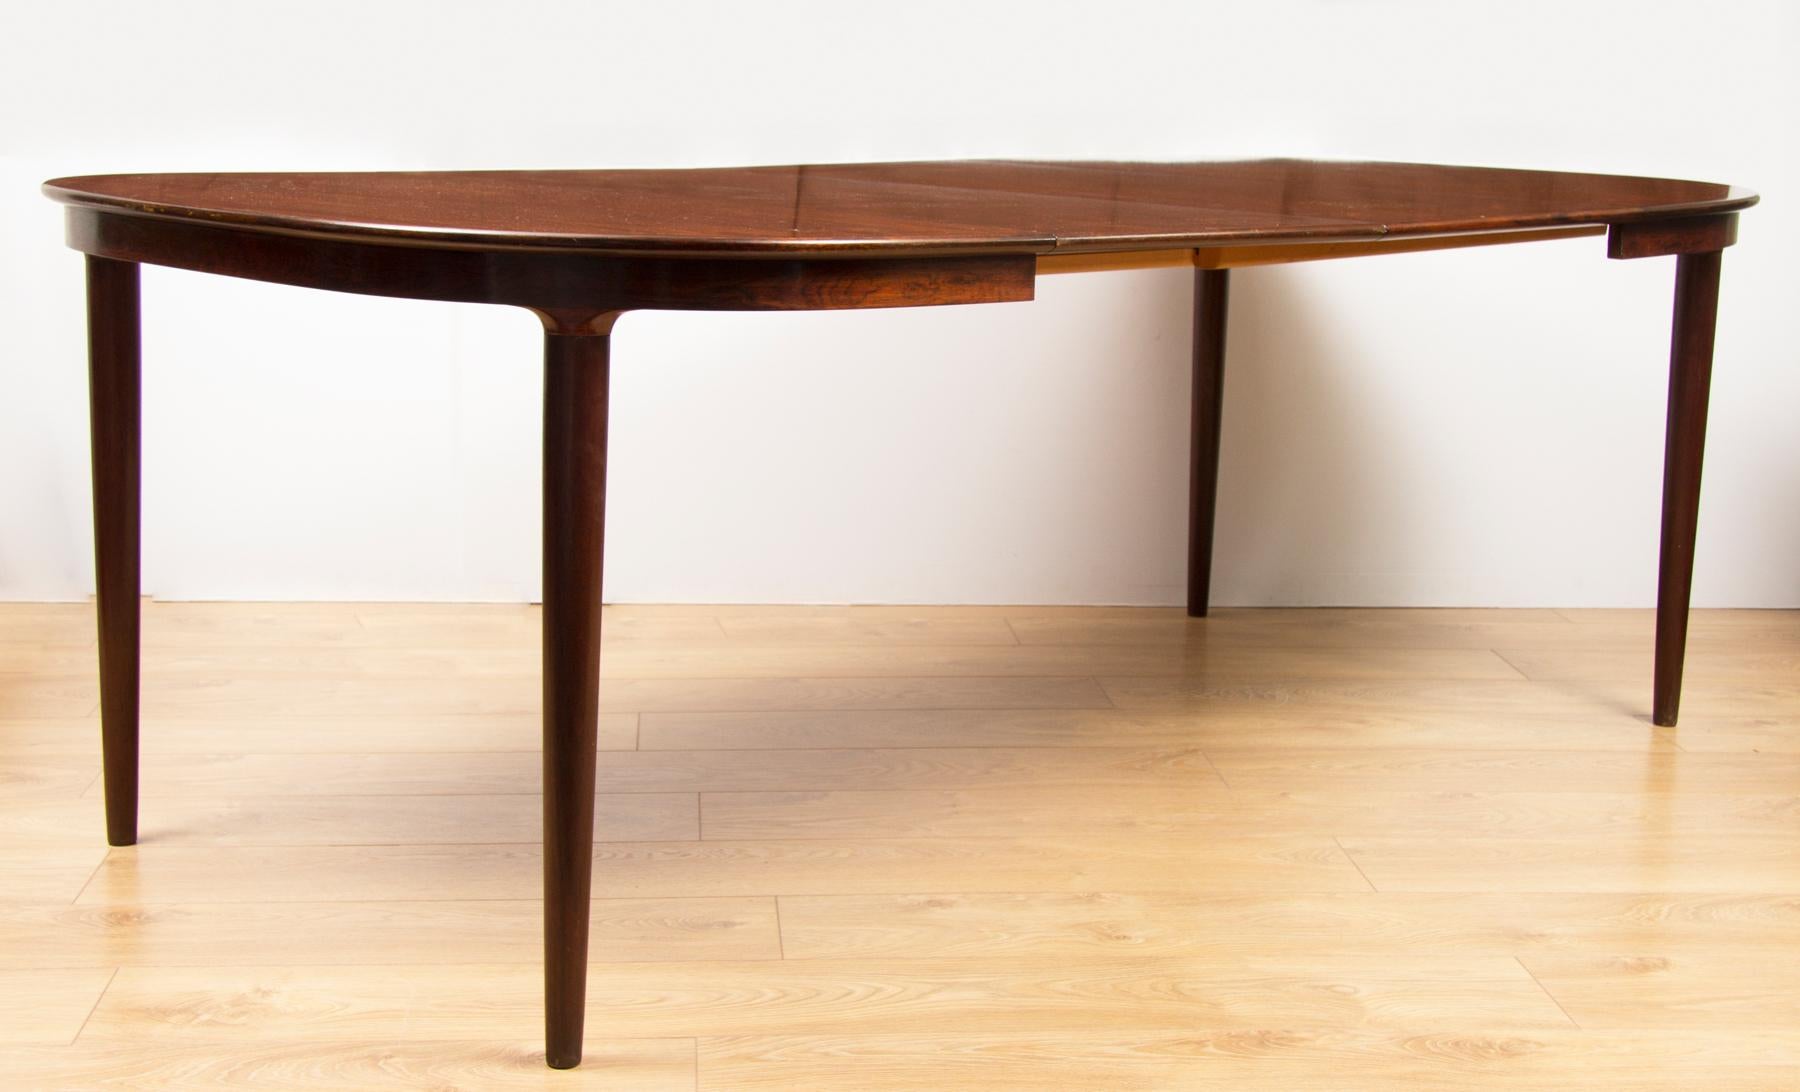 Midcentury Danish design rosewood extending dining table with detachable legs. 115 cm extending to 215 cm.